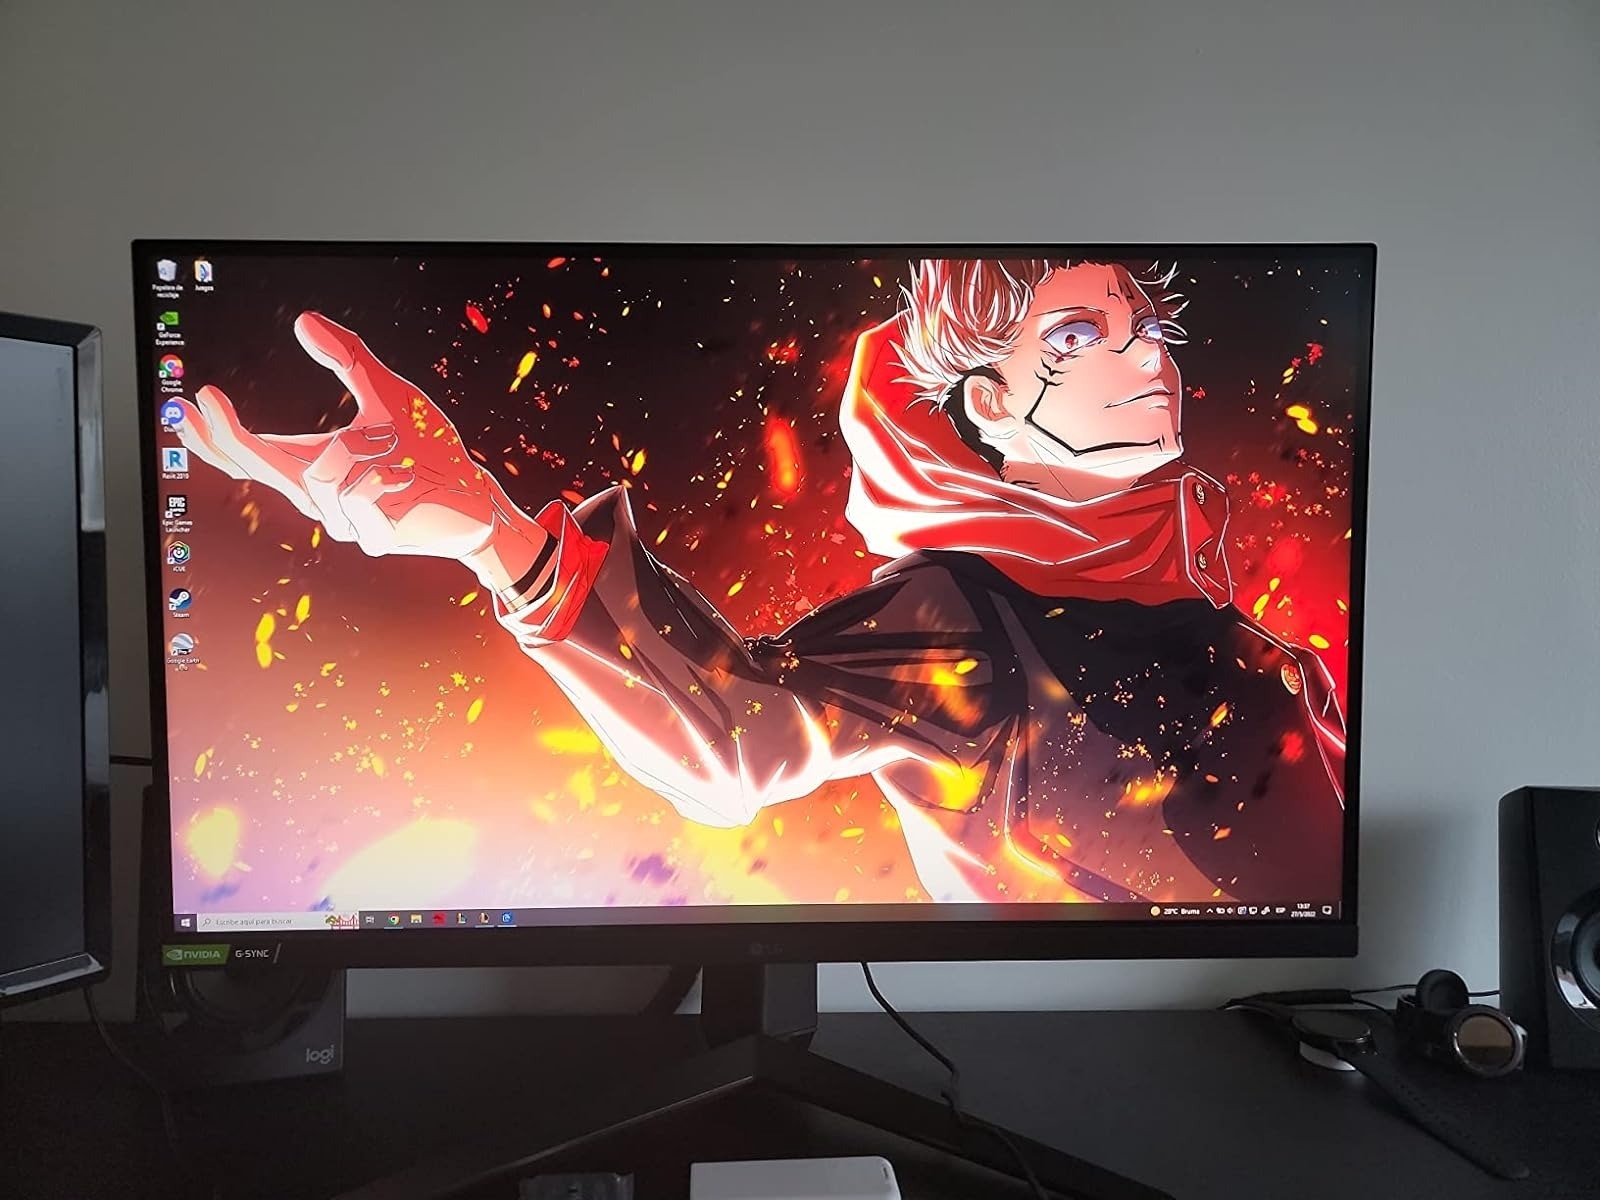 reviewer image of the LG monitor displaying a vivid image of an anime character